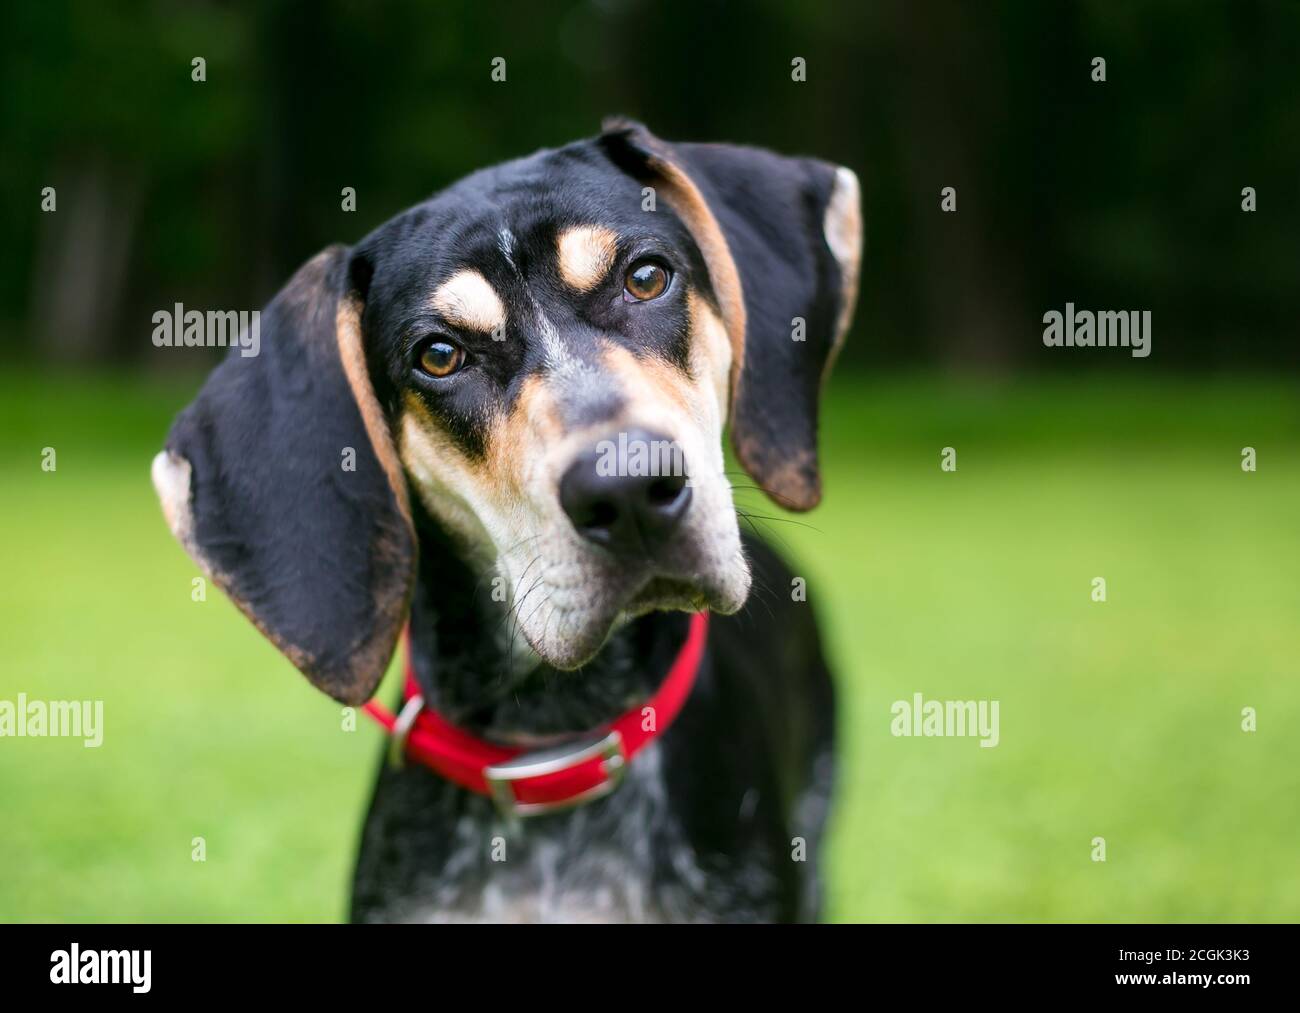 A Bluetick Coonhound dog outdoors wearing a red collar and listening with a head tilt Stock Photo